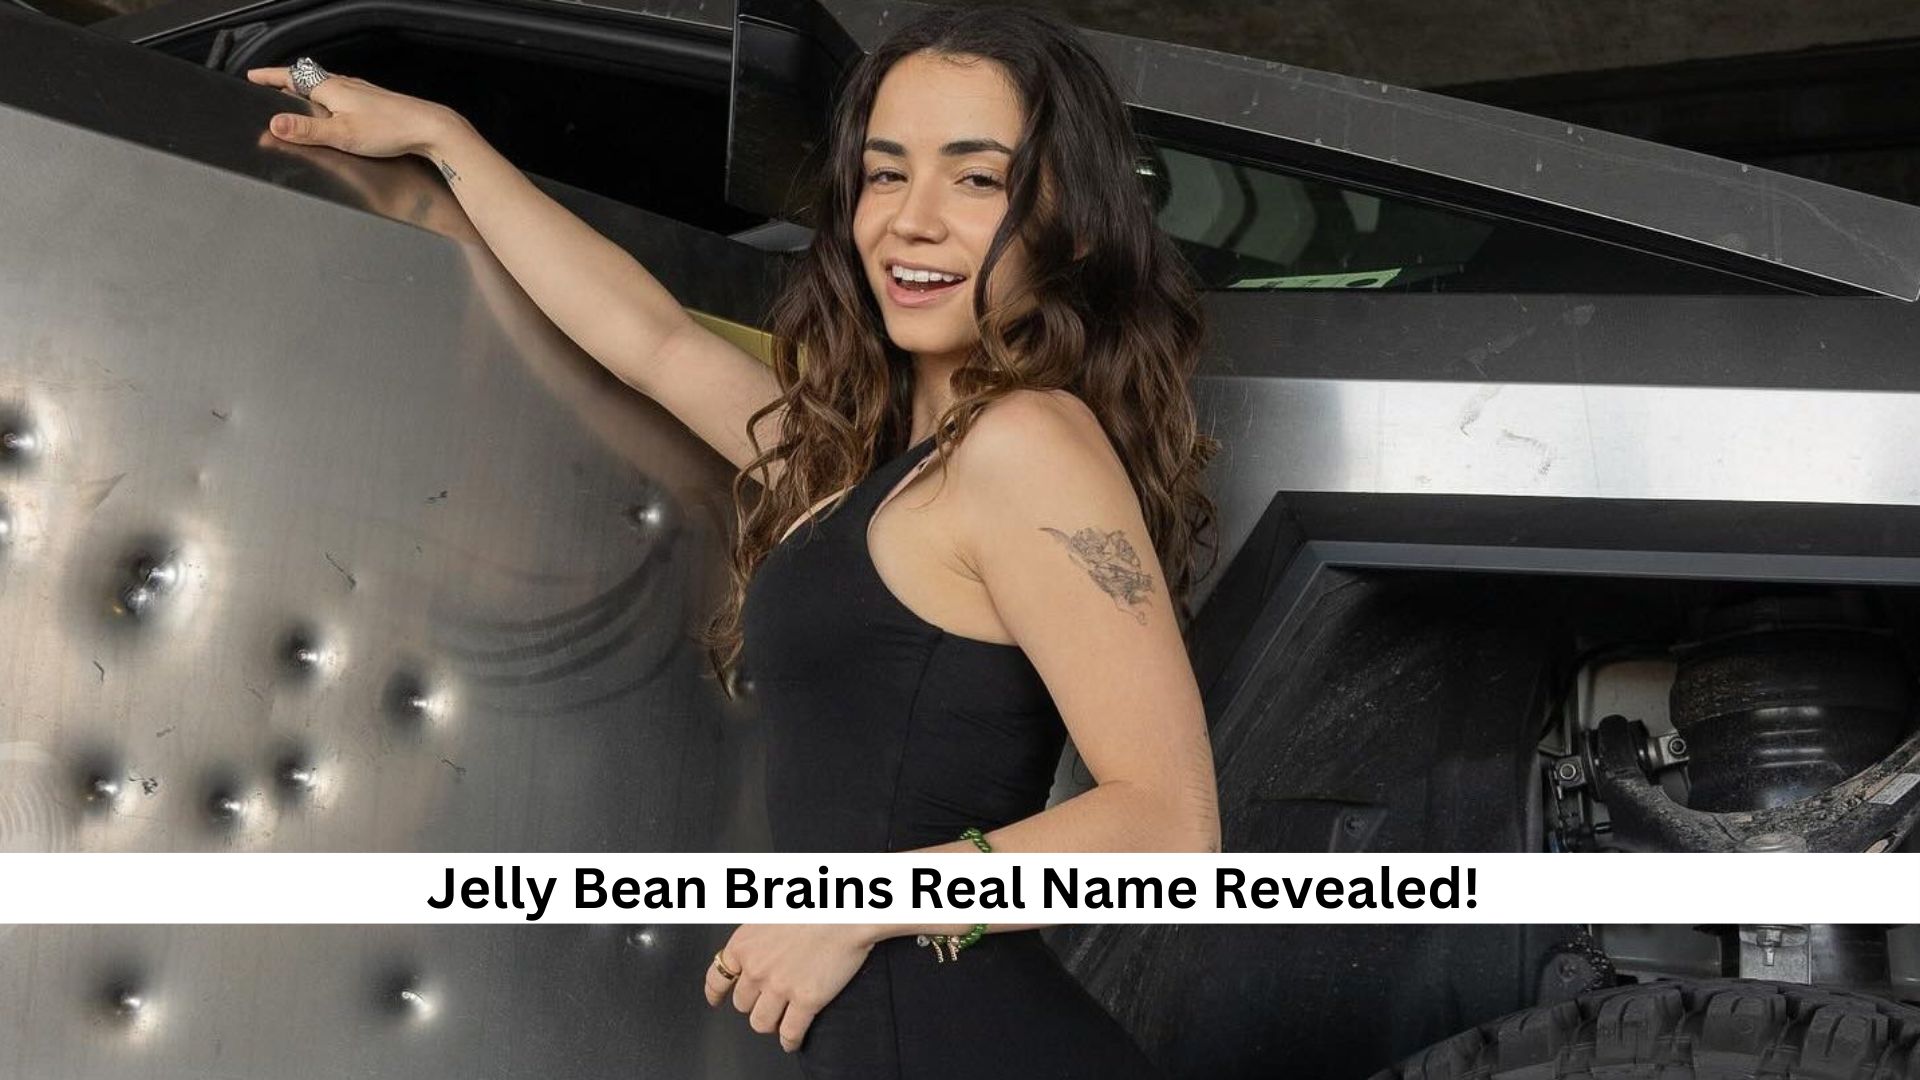 Jelly Bean Brains Real Name Revealed!